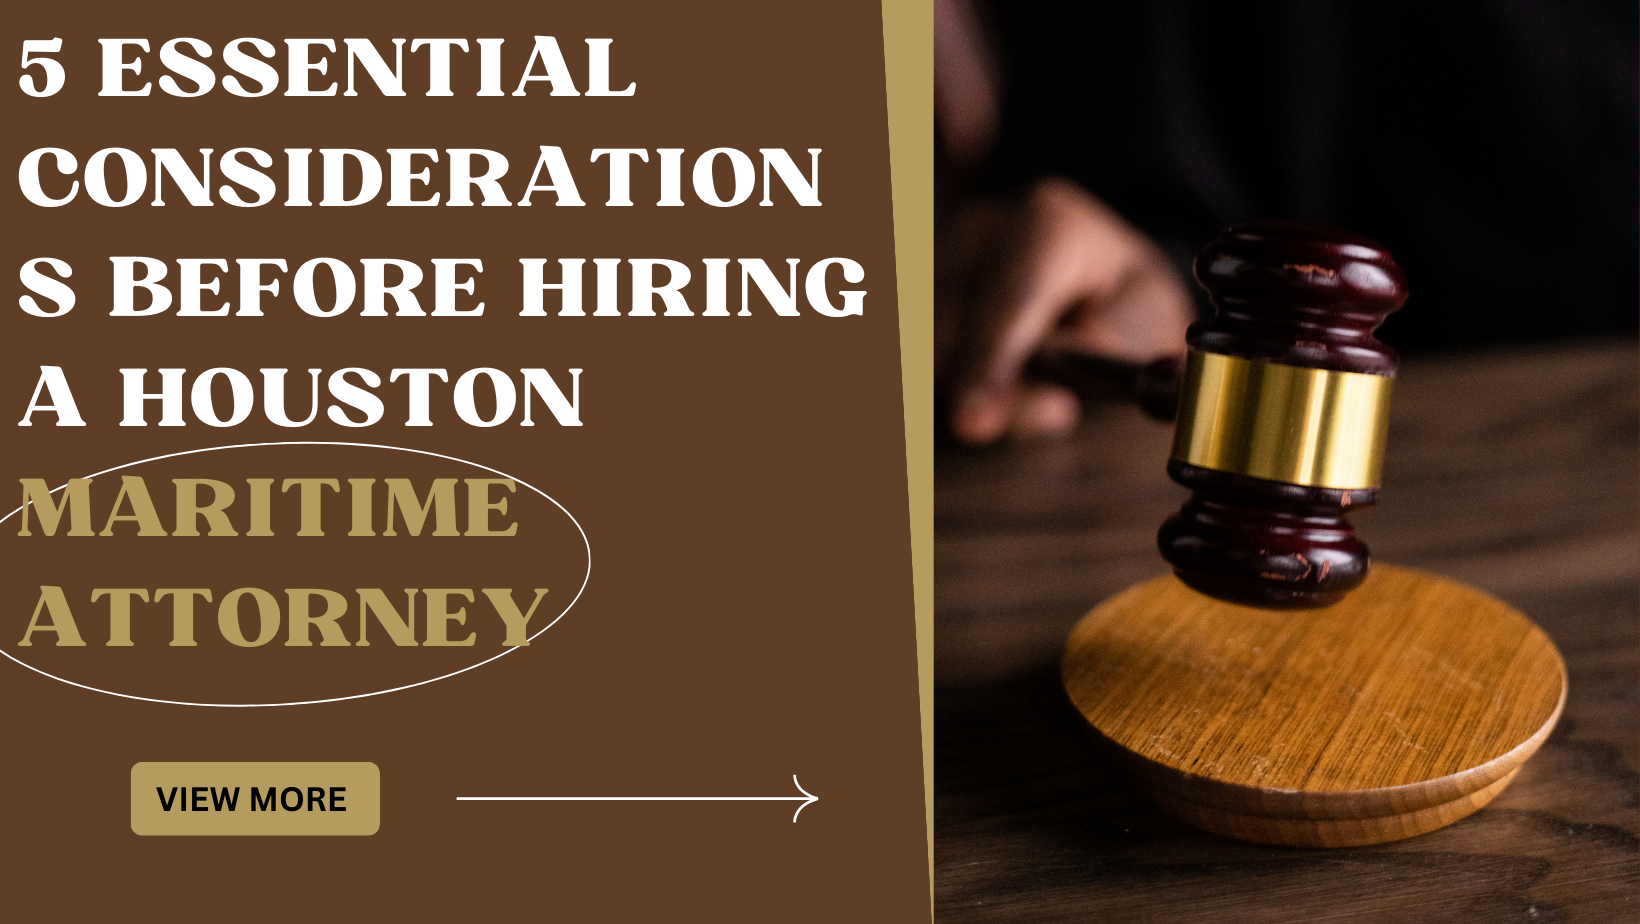 5 Essential Considerations Before Hiring a Houston Maritime Attorney